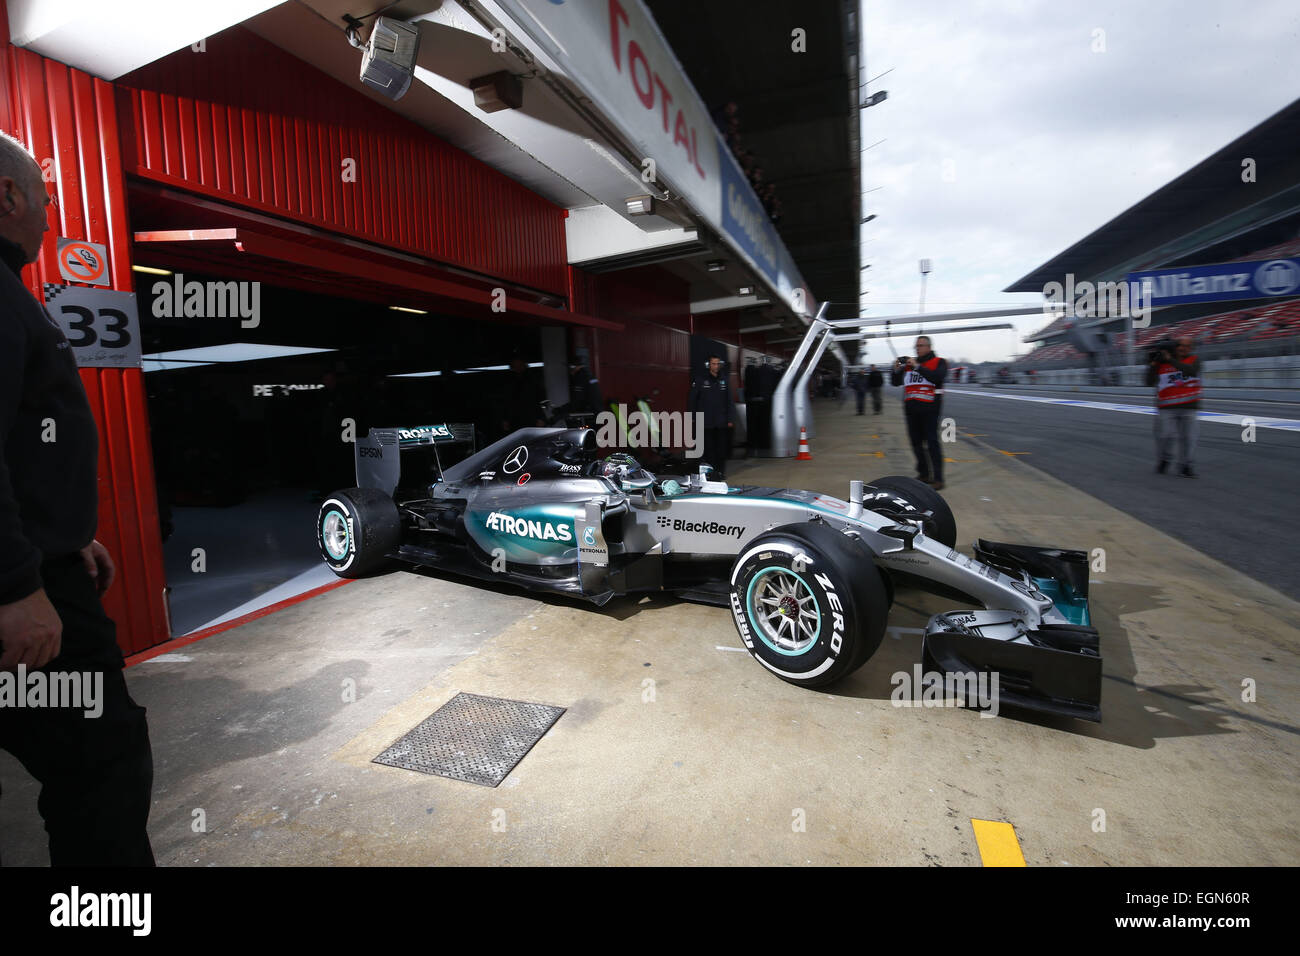 Barcelona, Spain. 27th Feb, 2015. Nico Rosberg (Mercedes Petronas), during day two of the final Formula One Winter Testing at Circuit de Catalunya (Barcelona) on February 27, 2015 in Montmelo, Spain. Foto: S. Stock Photo